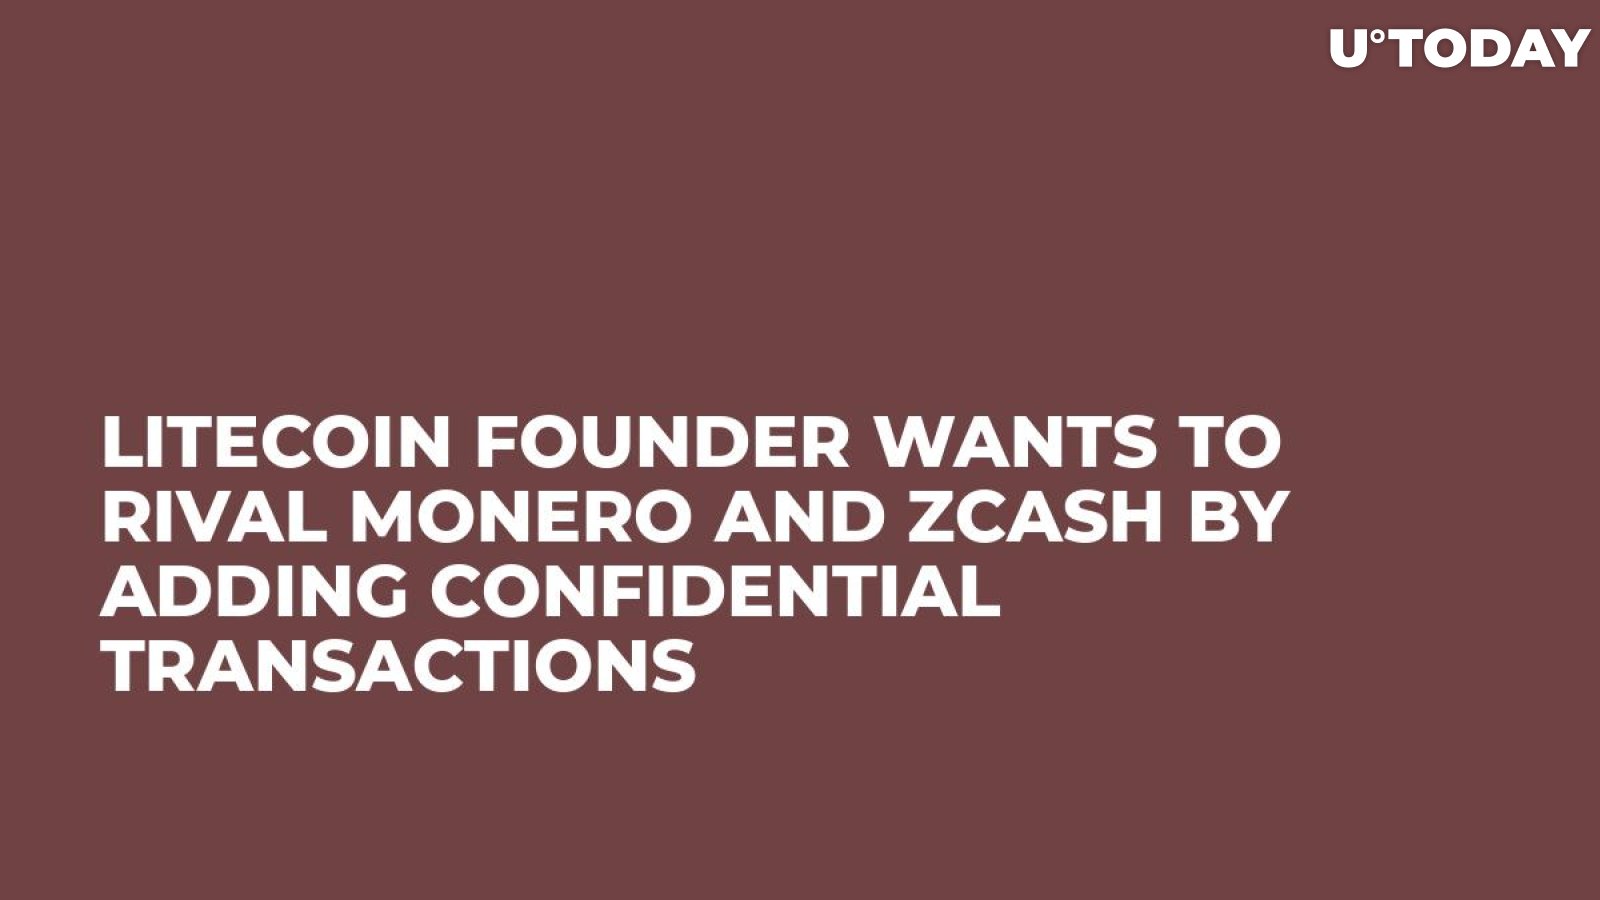 Litecoin Founder Wants to Rival Monero and ZCash by Adding Confidential Transactions